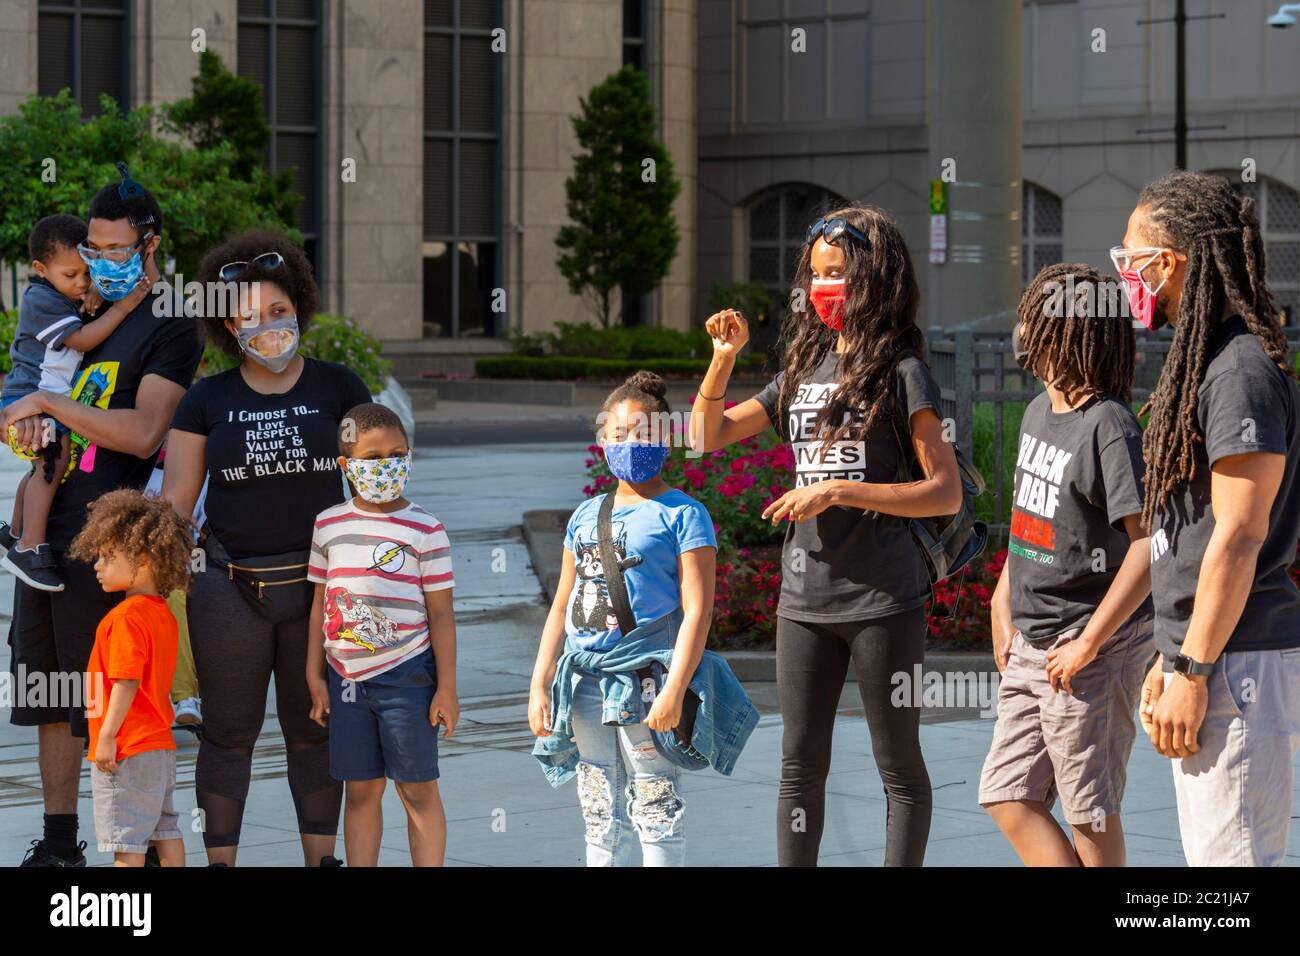 Detroit, United States. 15th June, 2020. Detroit, Michigan - Deaf people participated in a Black Disabled Lives Matter protest. Deaf children used sign language to introduce themselves to participants. Credit: Jim West/Alamy Live News Stock Photo